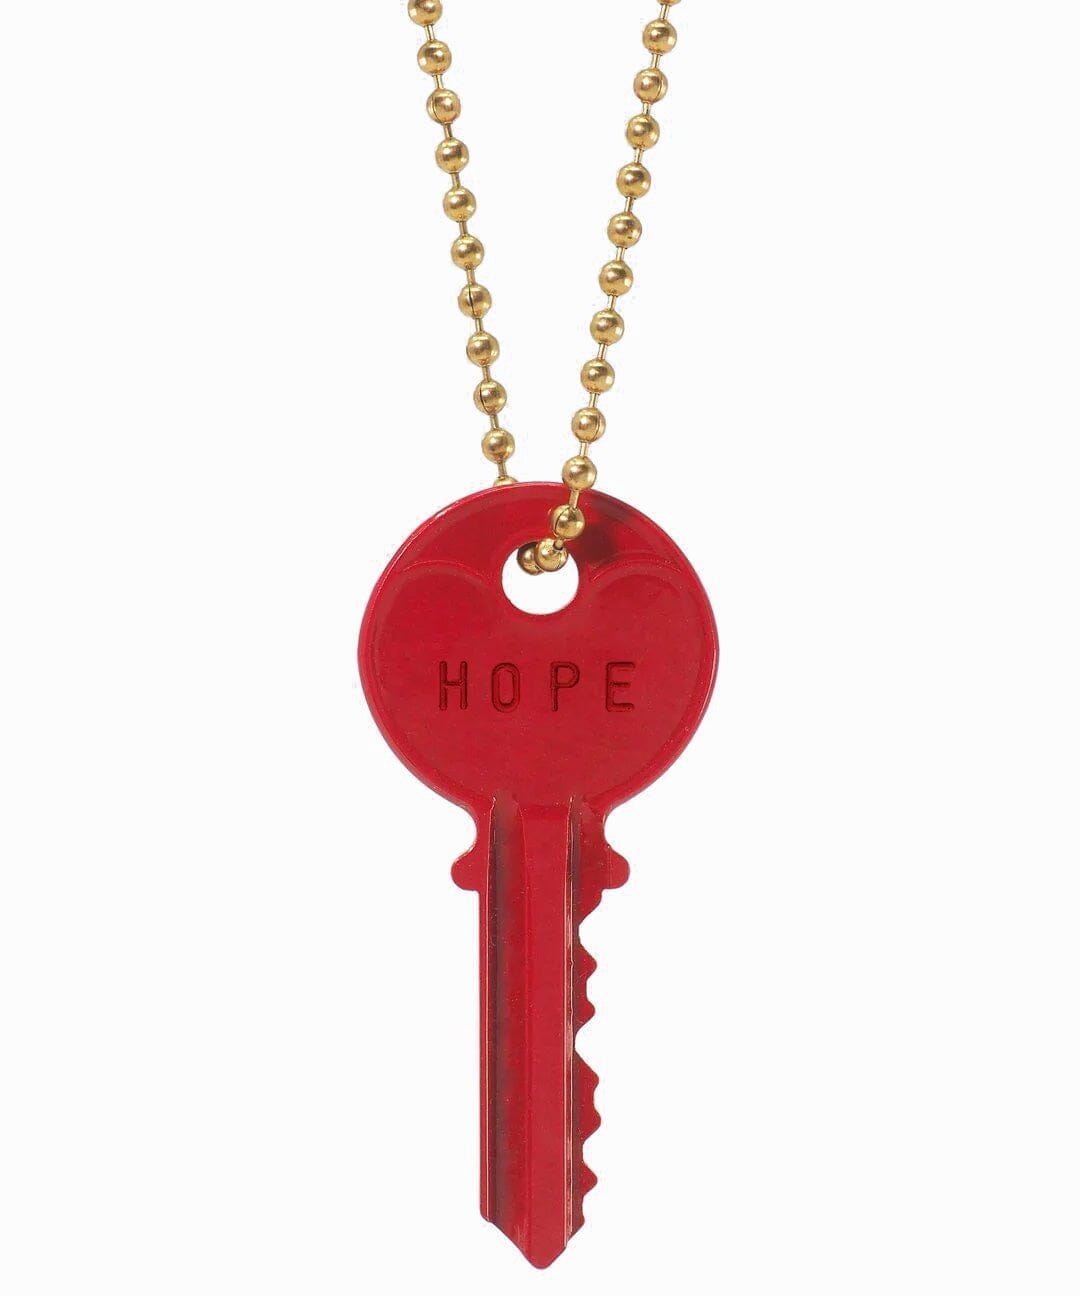 N - True Red Classic Ball Chain Key Necklace Necklaces The Giving Keys 